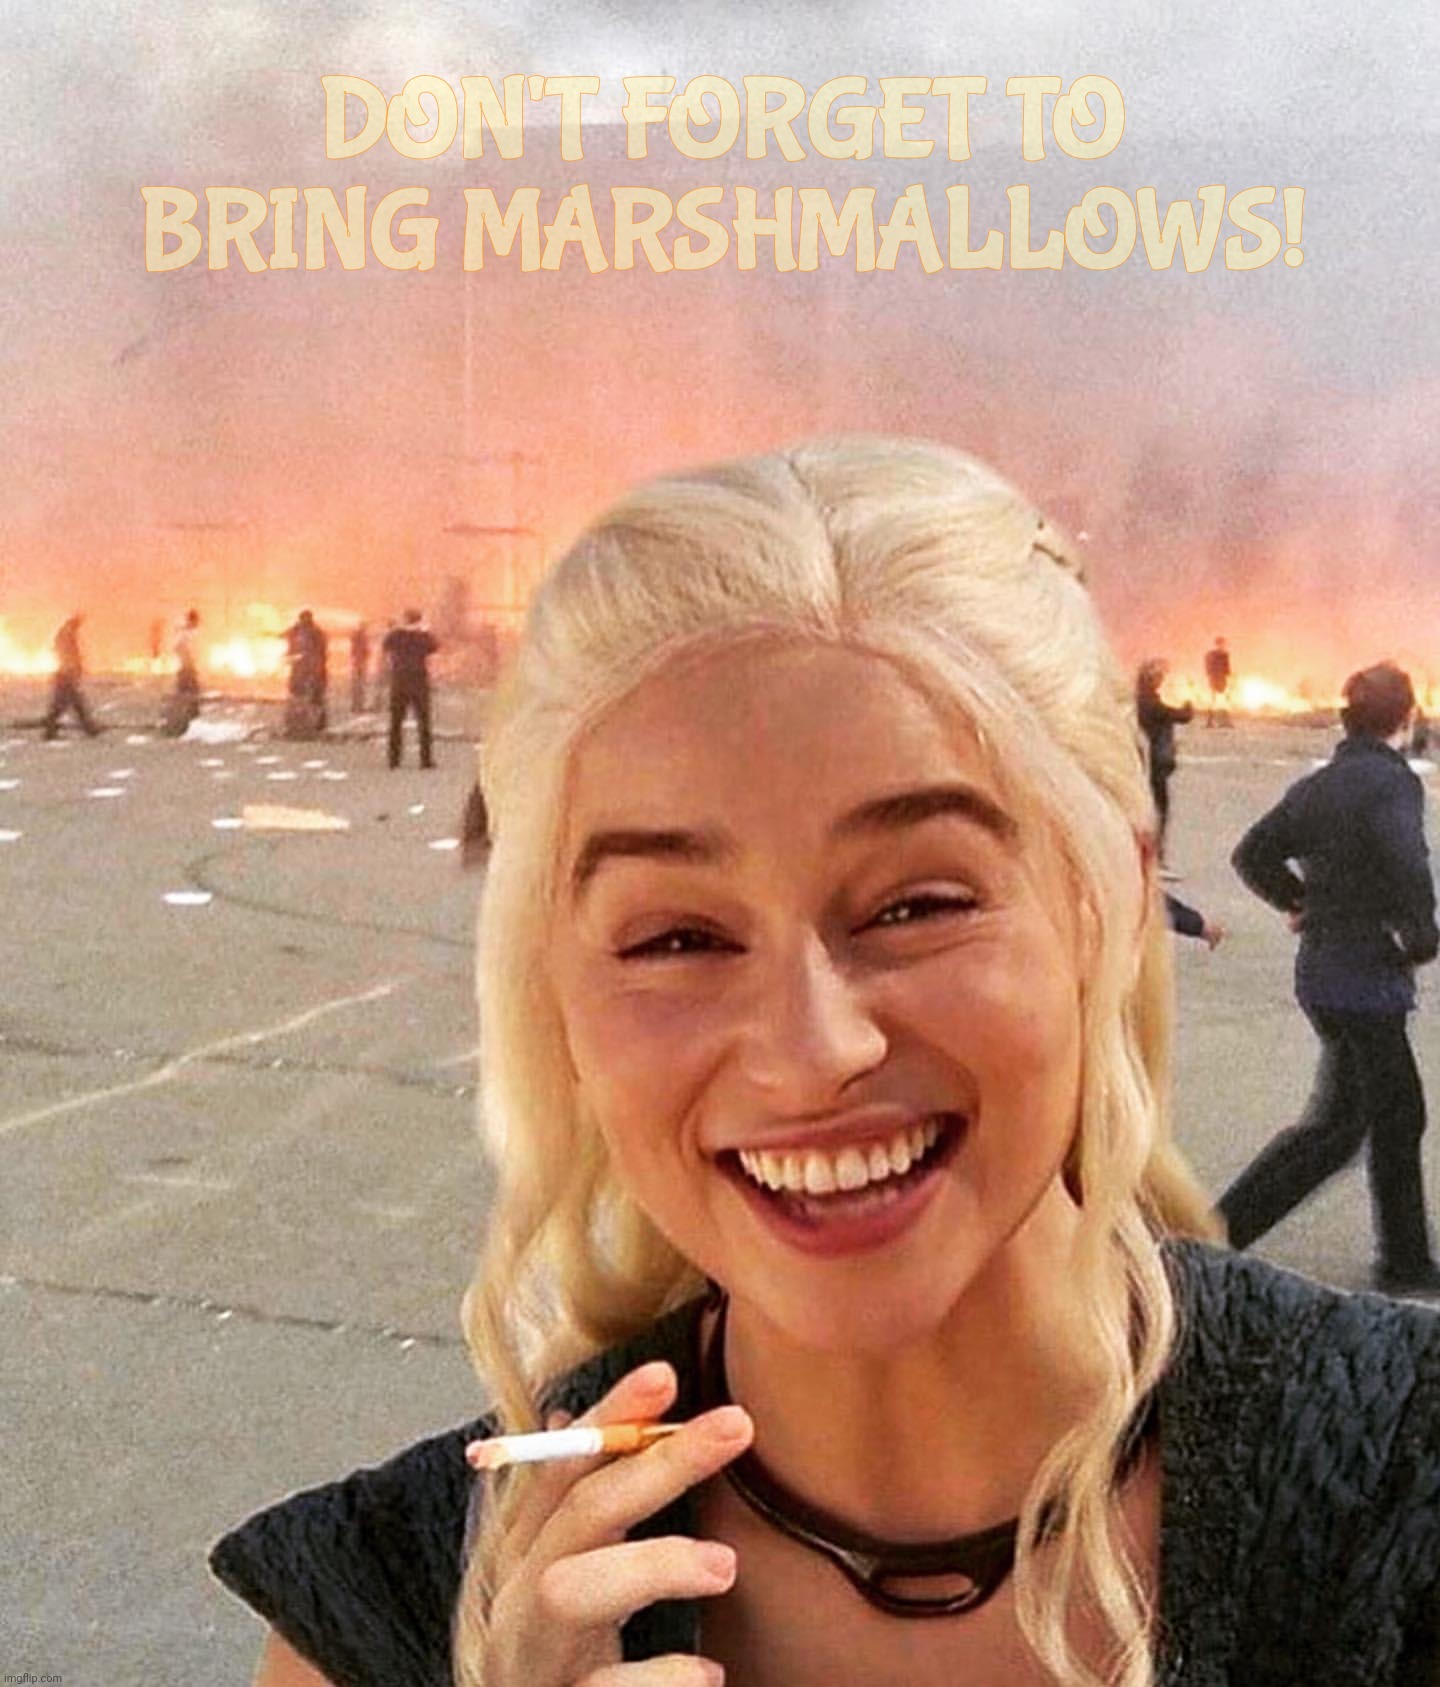 disaster smoker girl | DON'T FORGET TO BRING MARSHMALLOWS! | image tagged in disaster smoker girl | made w/ Imgflip meme maker